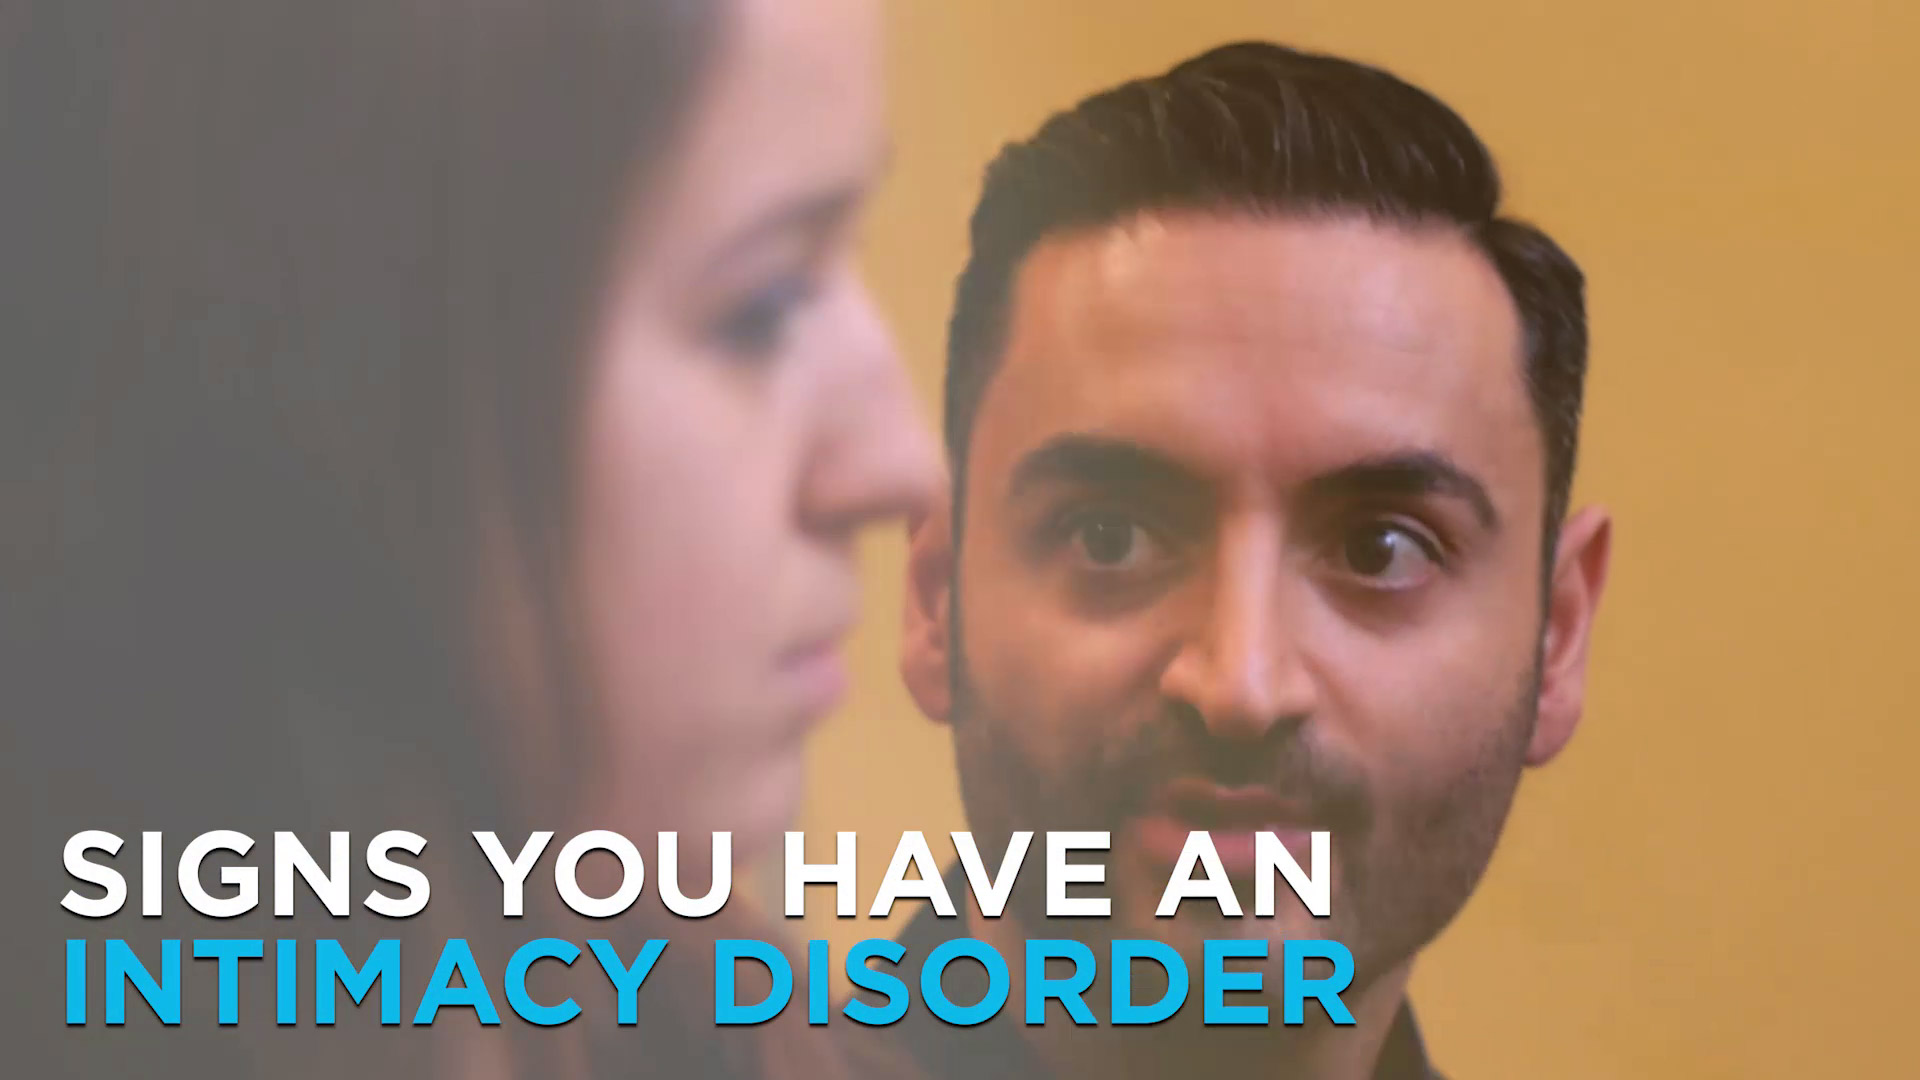 Signs You Have an Intimacy Disorder